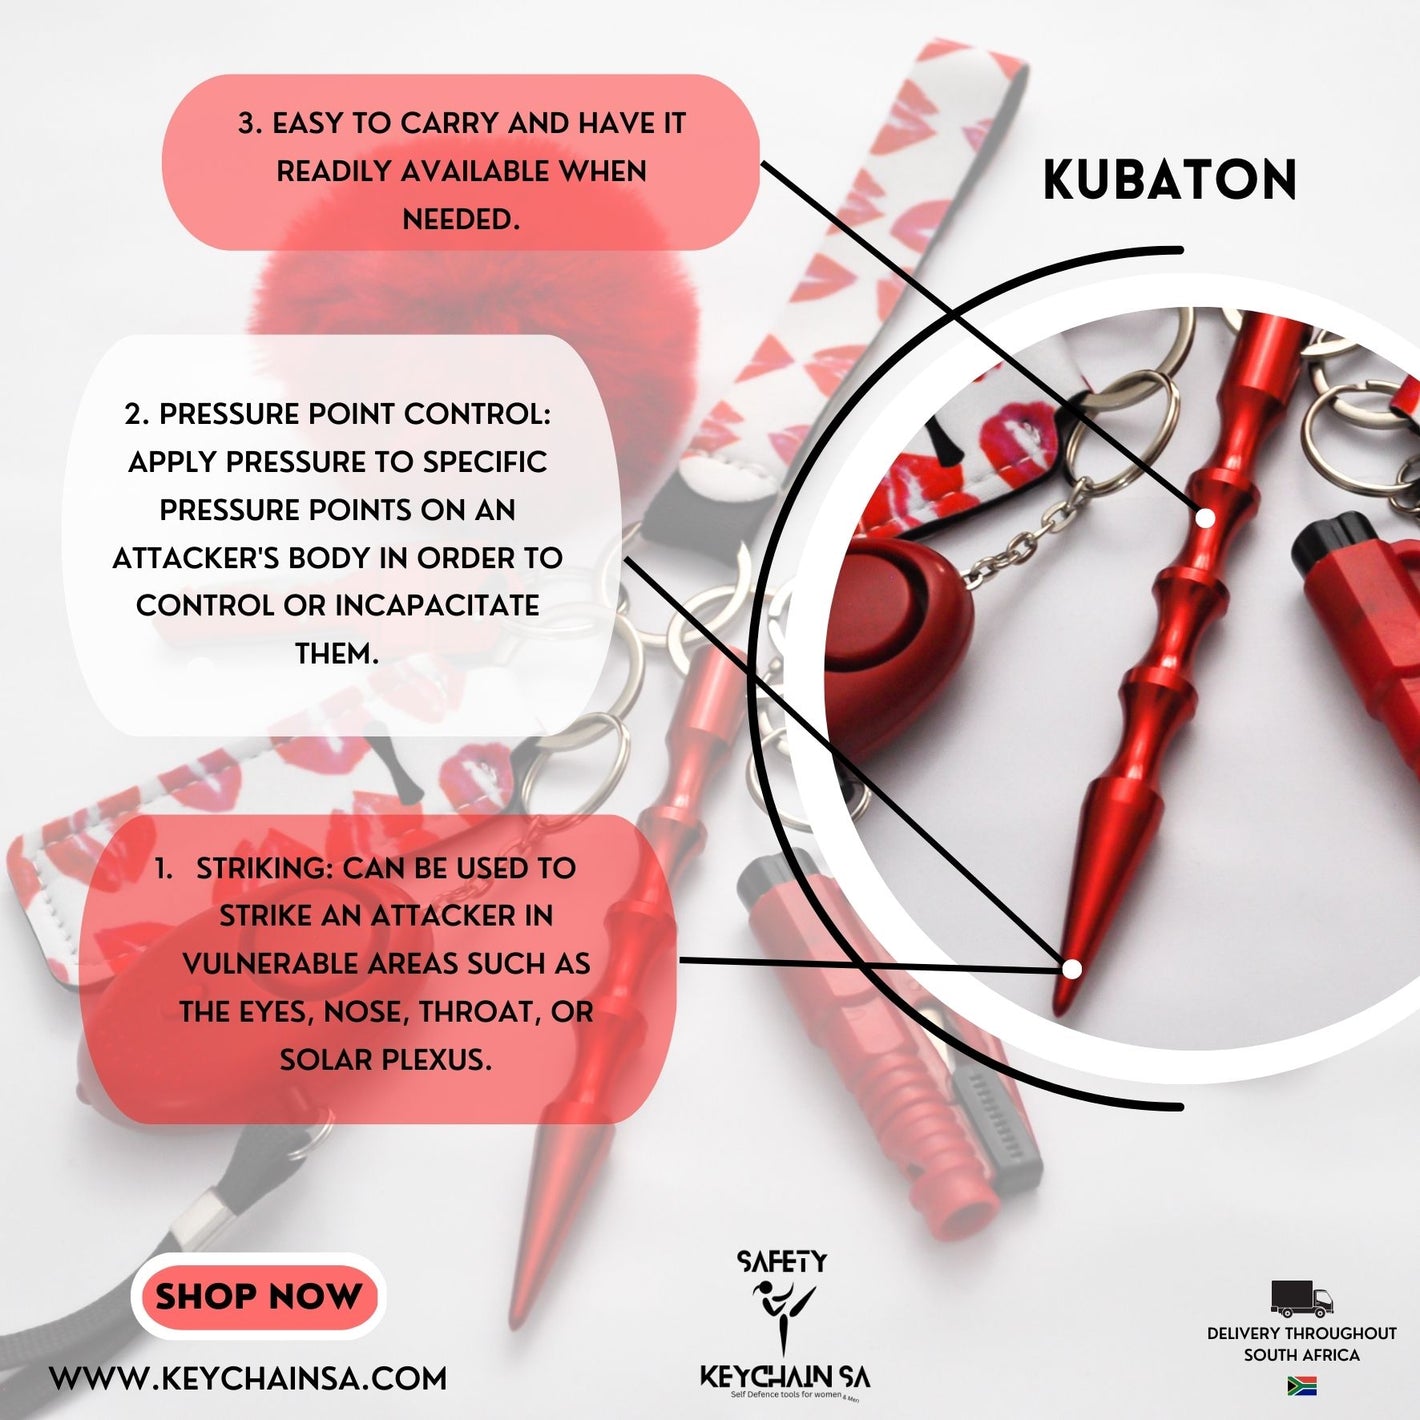 What is a Kubaton and how to use a Kubaton